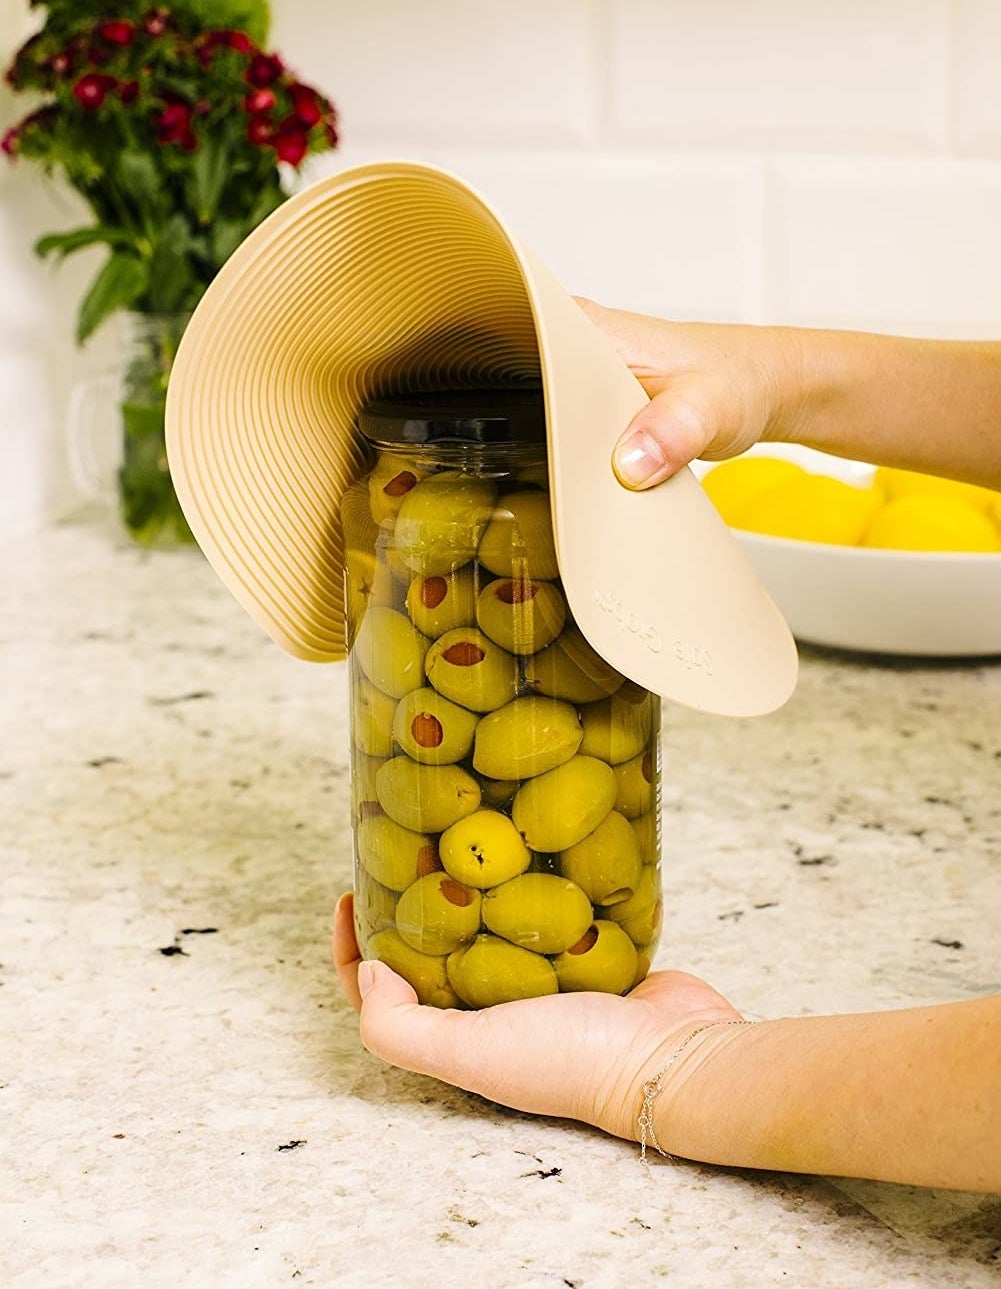 Someone using the silicone mat to open a jar of olives